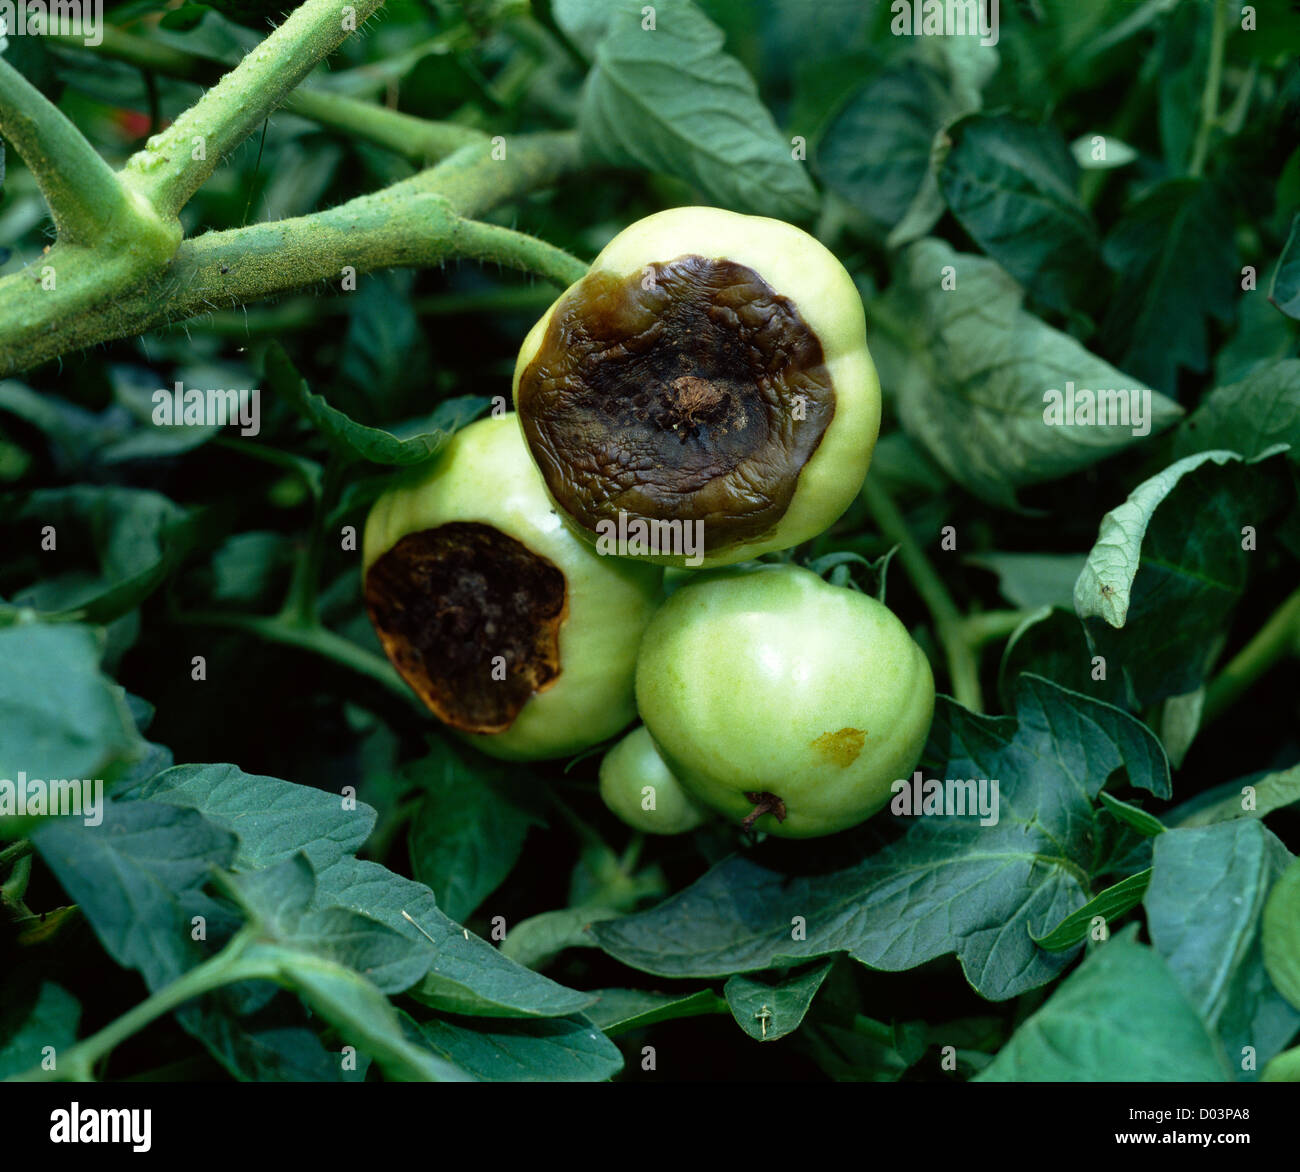 BLOSSOM-END ROT IN TOMATOES Stock Photo